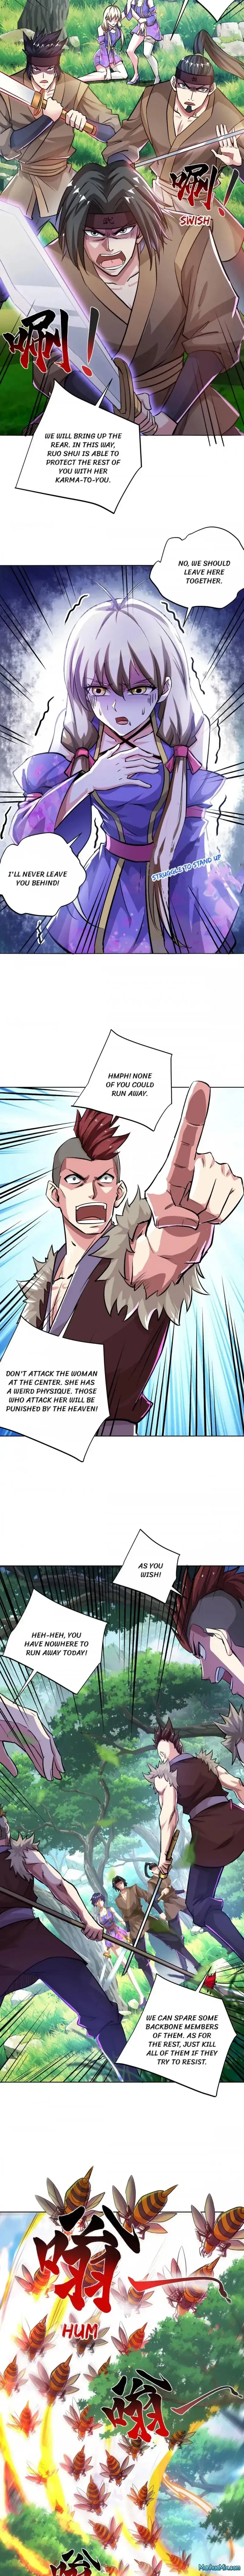 The First Son-In-Law Vanguard of All Time Chapter 284 page 4